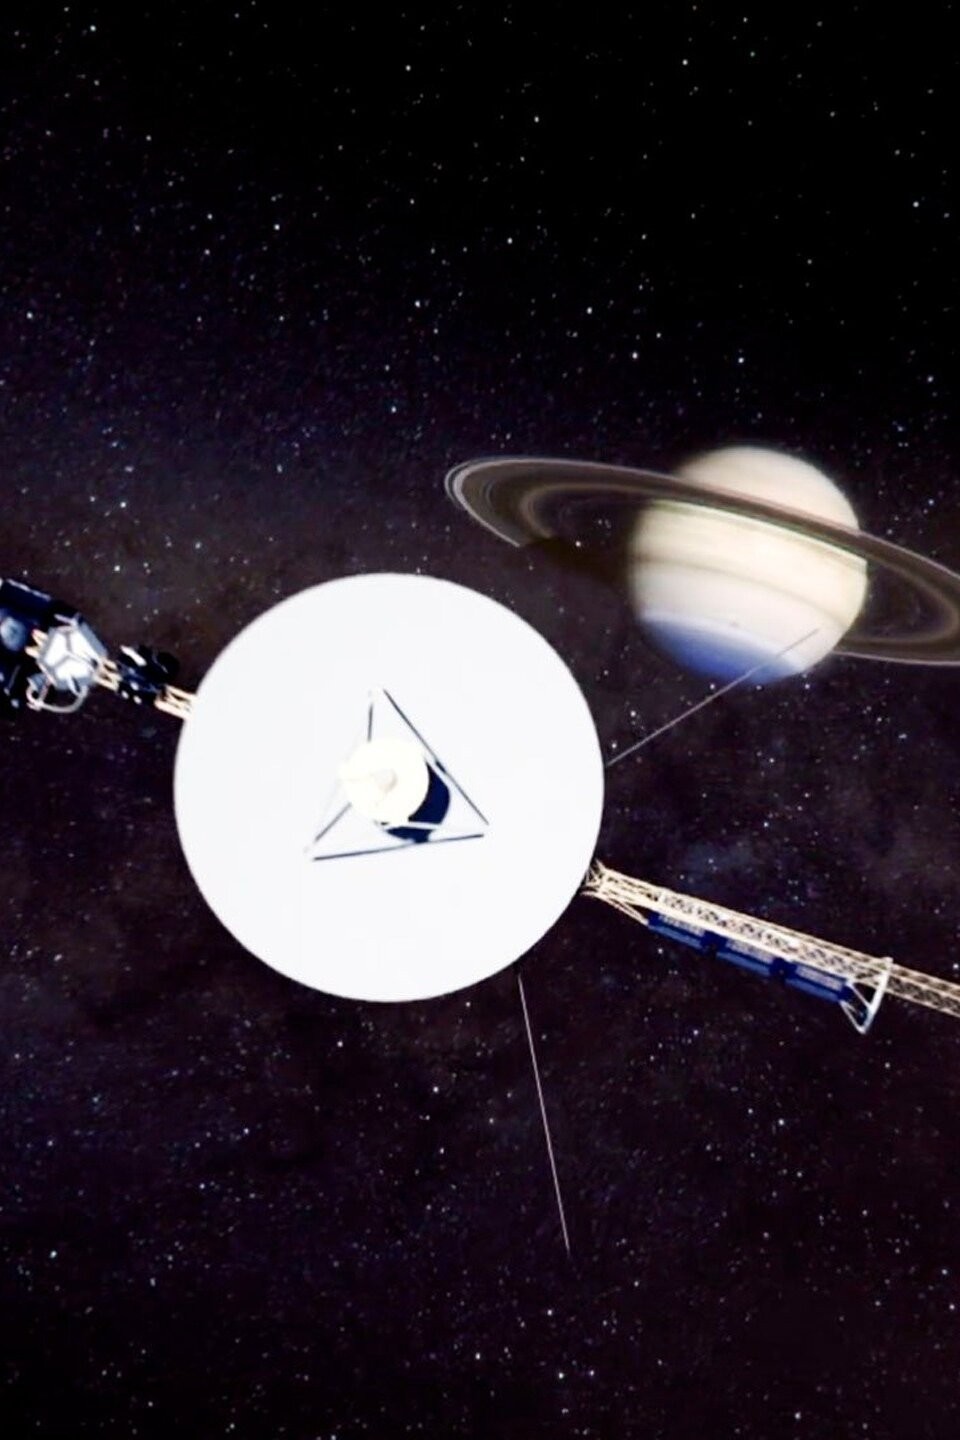 voyager's ultimate mission